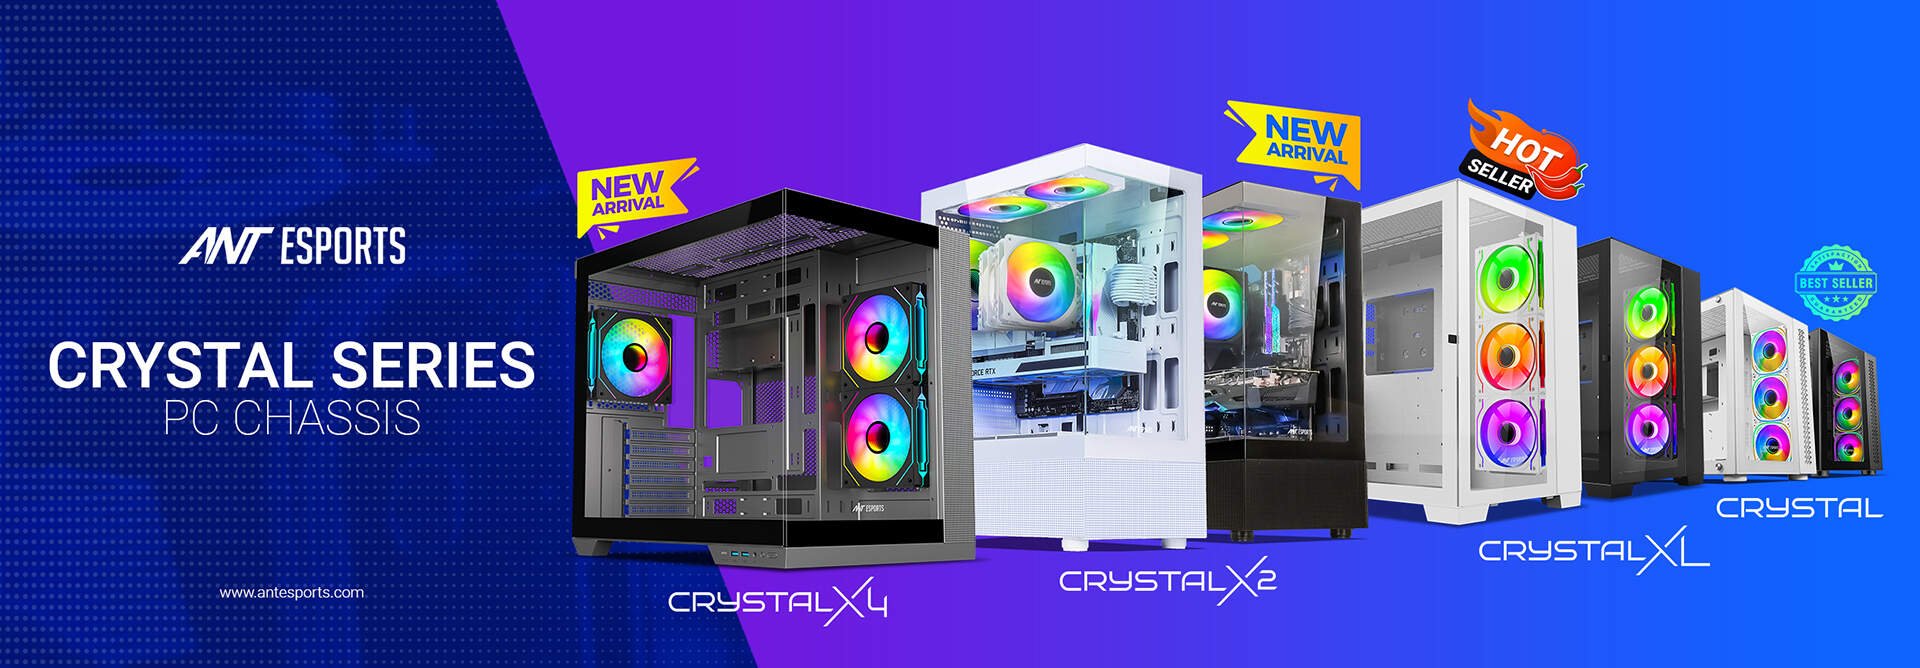 Ant-esports-Crystal-Series-theitgear-offers